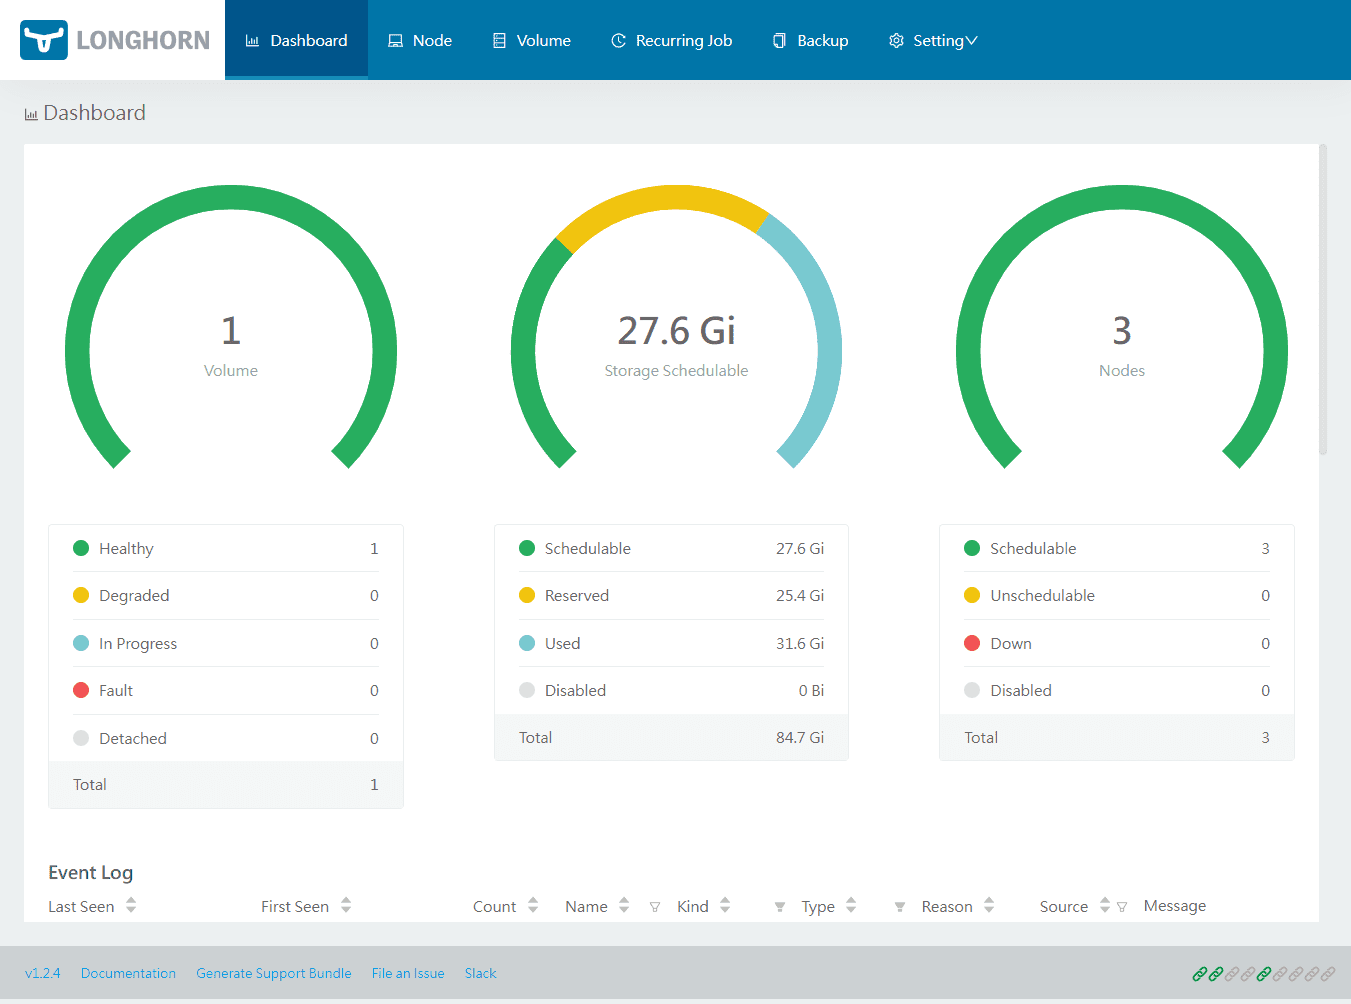 The Longhorn dashboard now showing the new volume